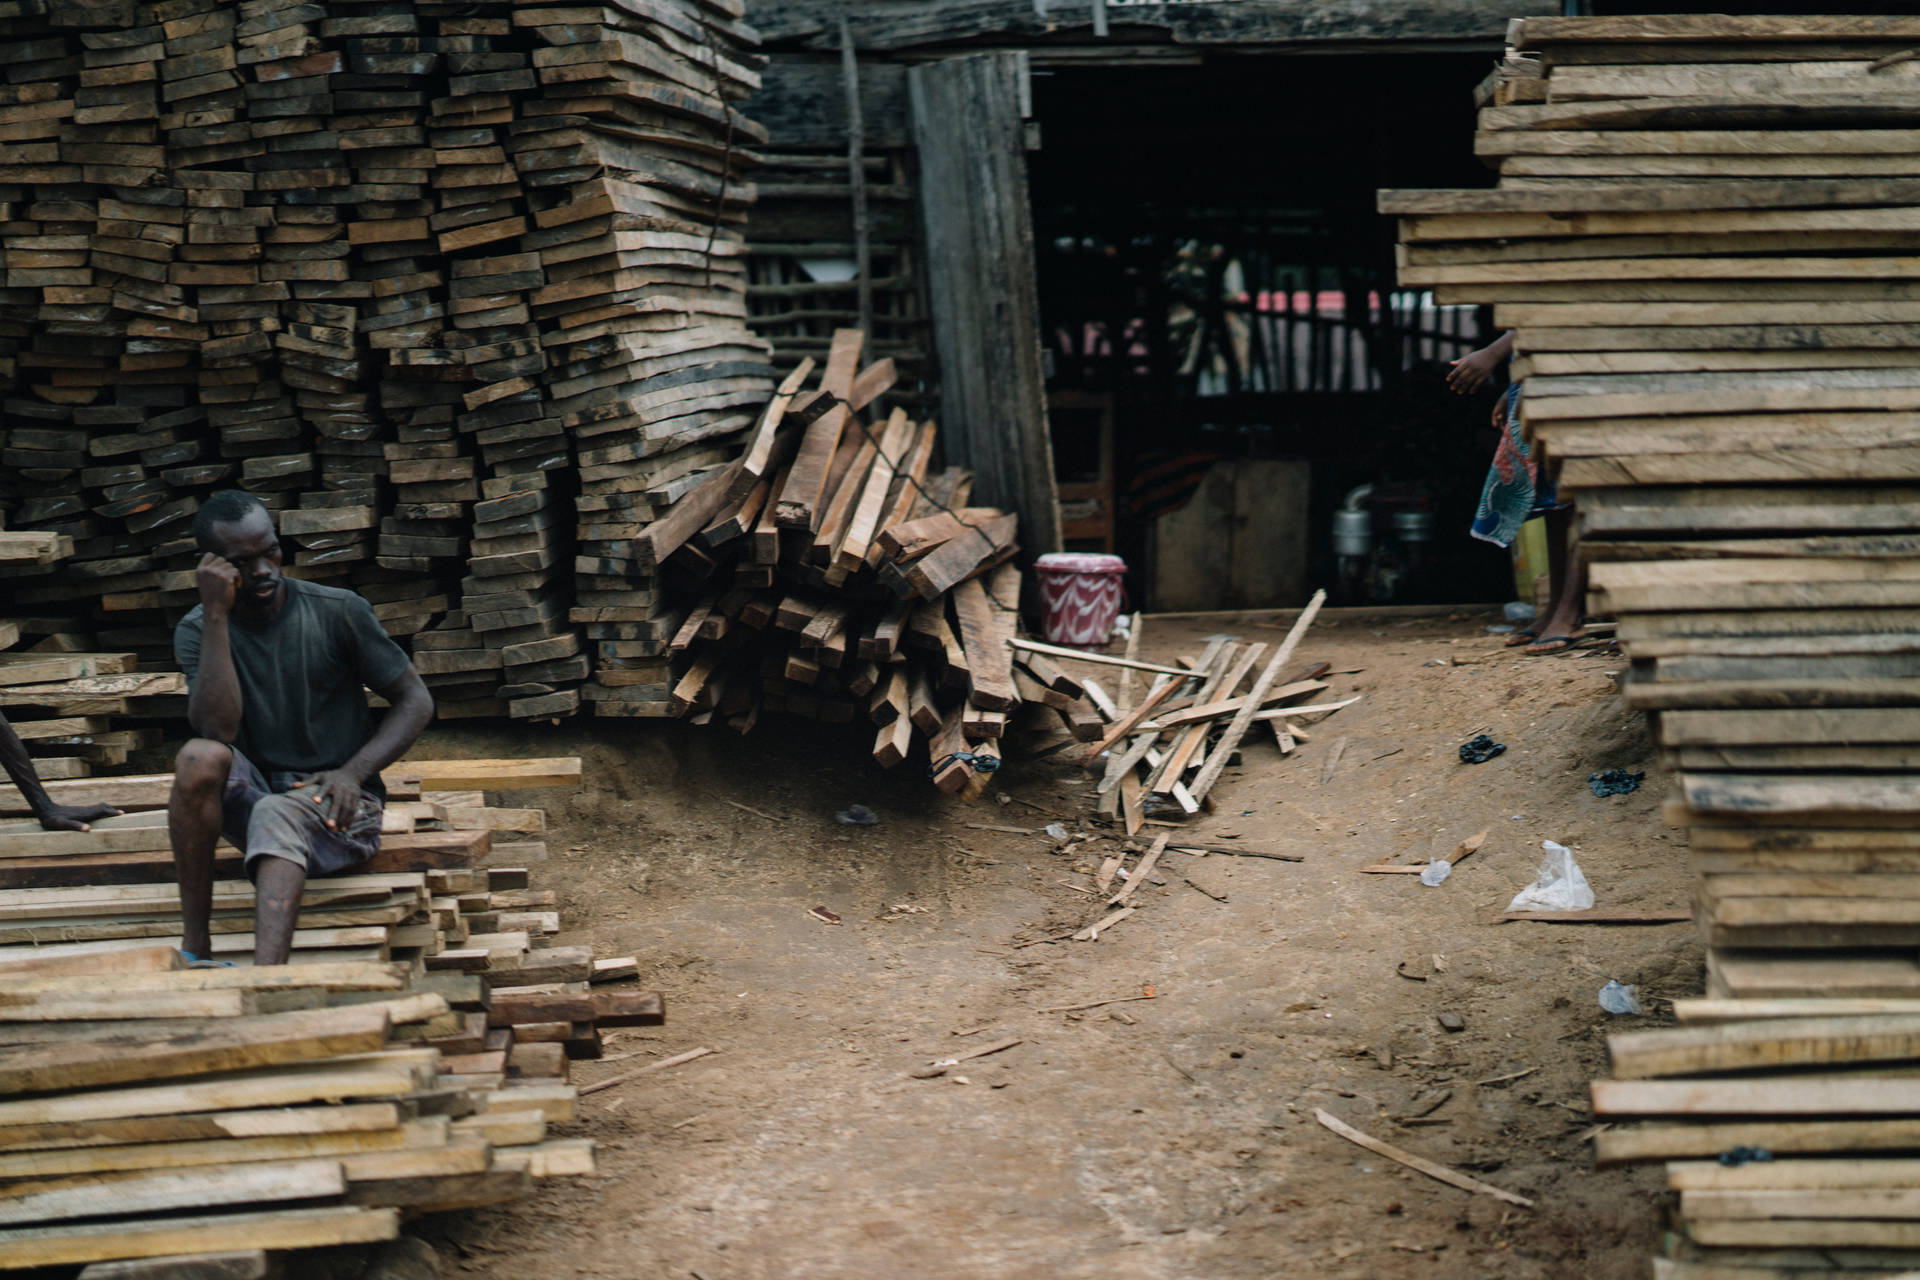 Carpenter With Stacks Of Wood In Sierra Leone